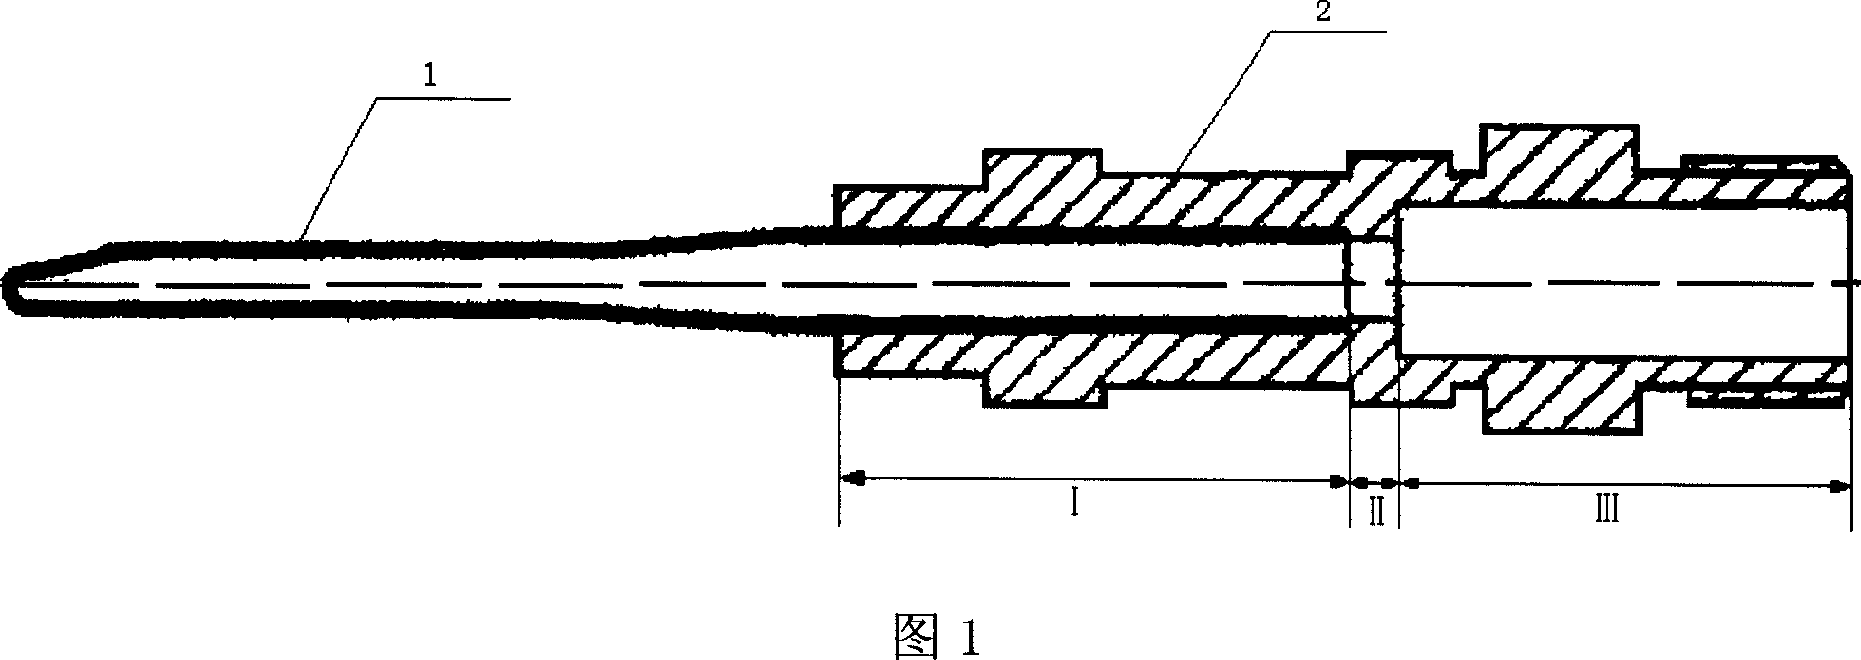 High speed streamline auxiliary nozzle